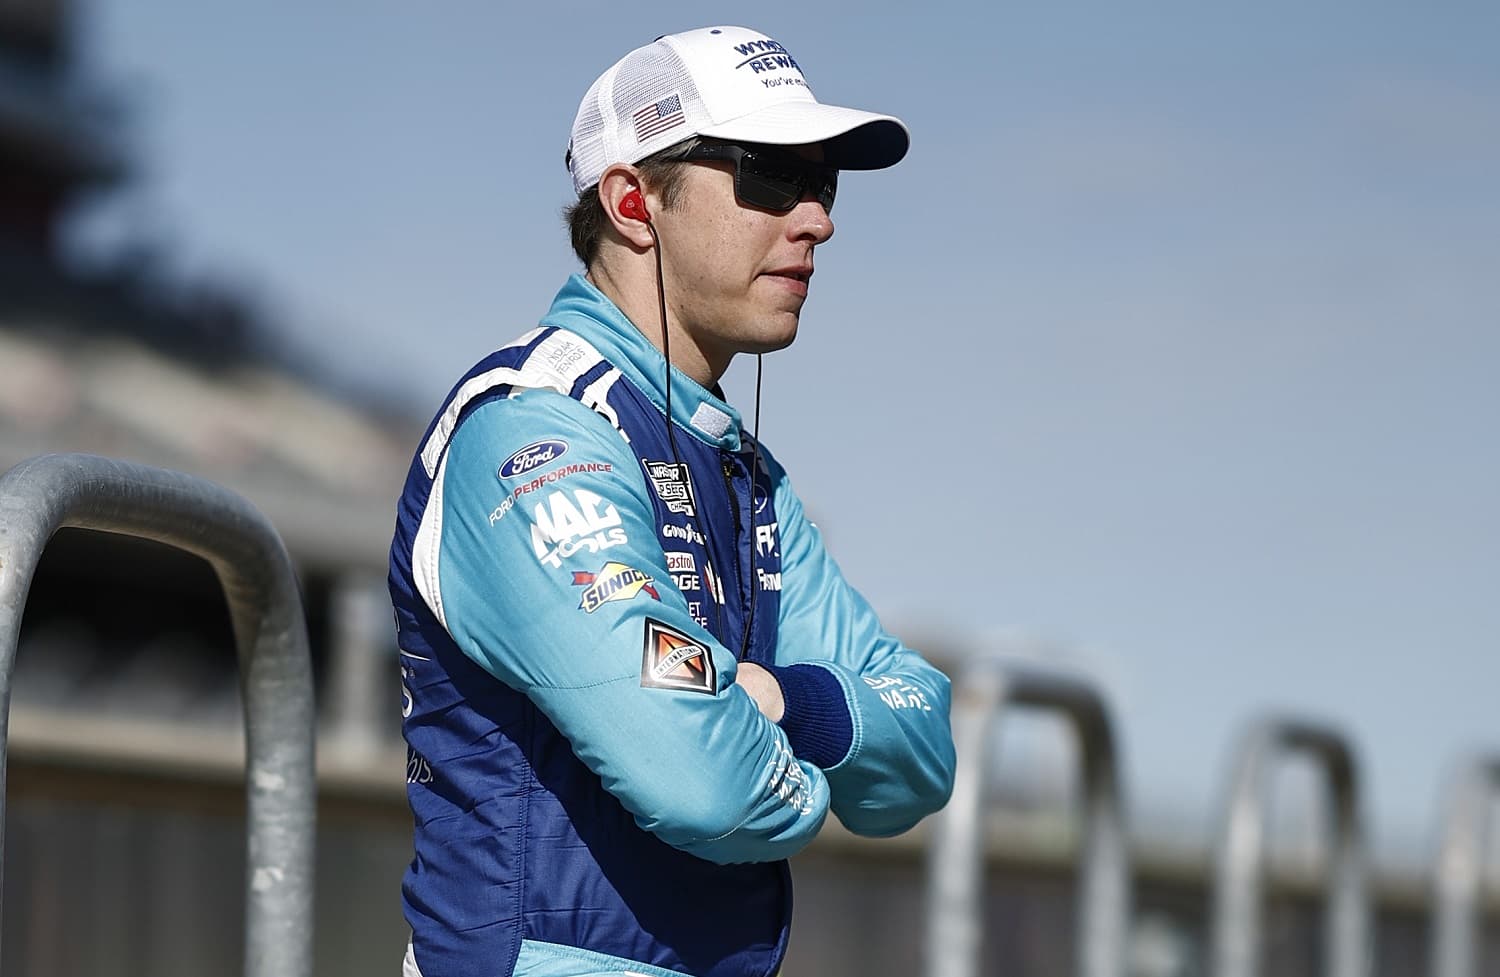 Brad Keselowski waits in the garage area during qualifying for the NASCAR Cup Series EchoPark Automotive Grand Prix at Circuit of The Americas on March 25, 2023 in Austin, Texas.